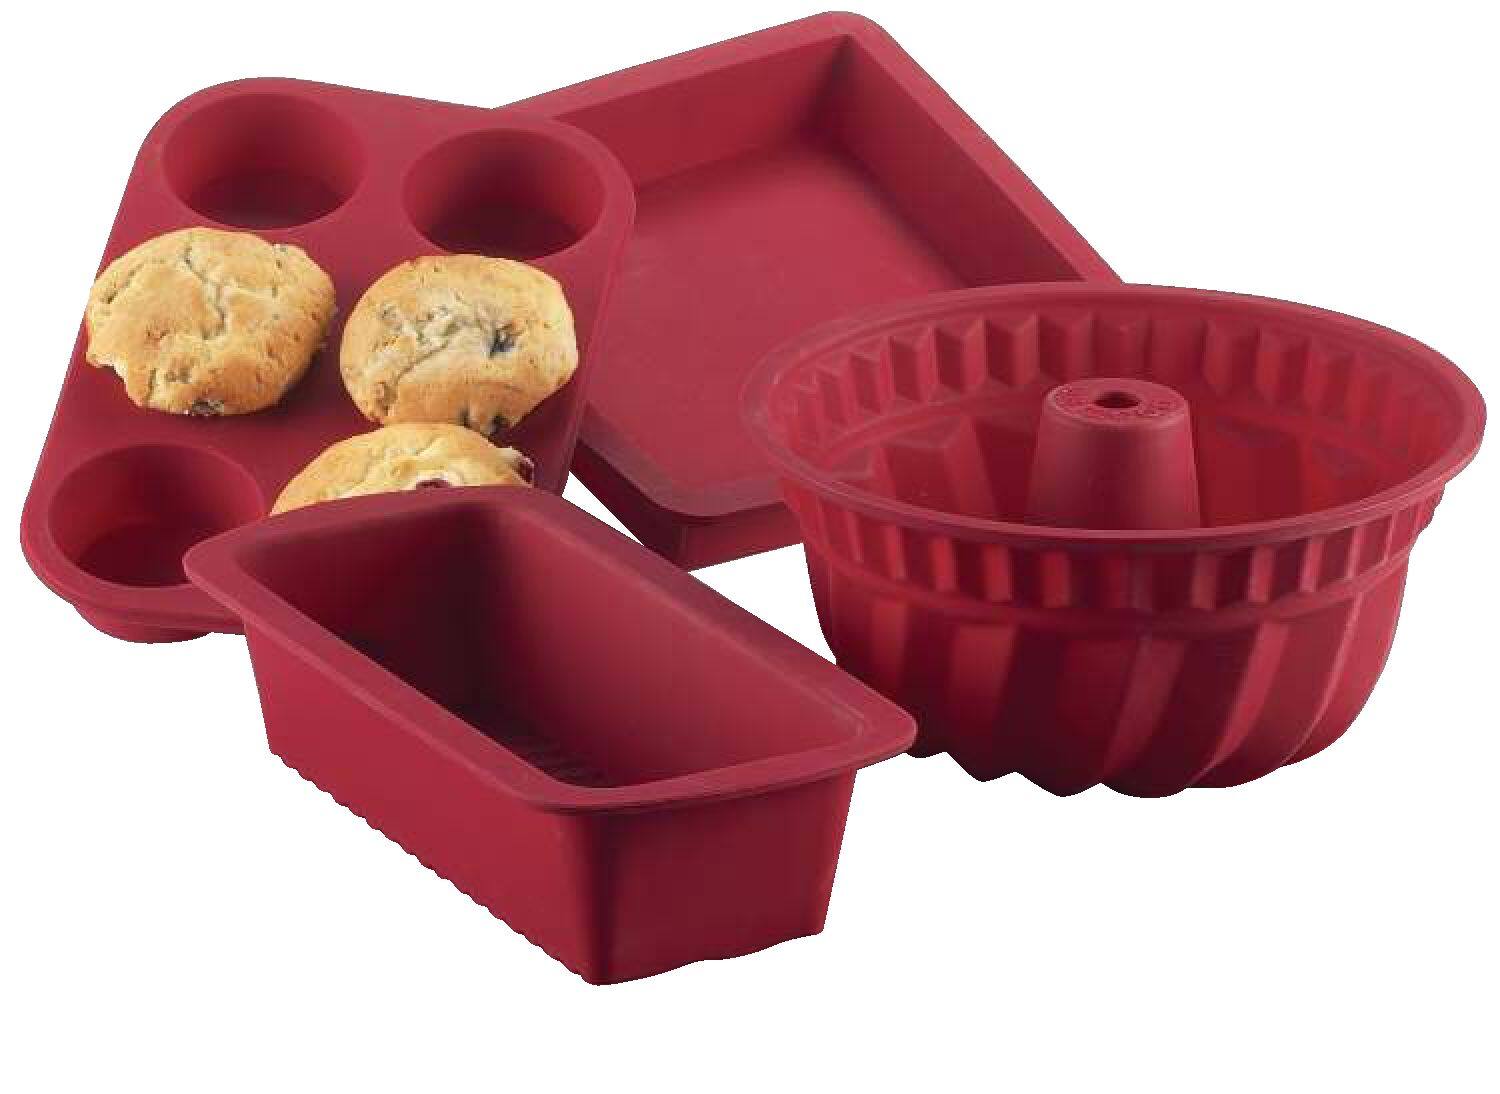 MASTER Chef Silicone Non-Stick Cake Pan, Red | Canadian Tire